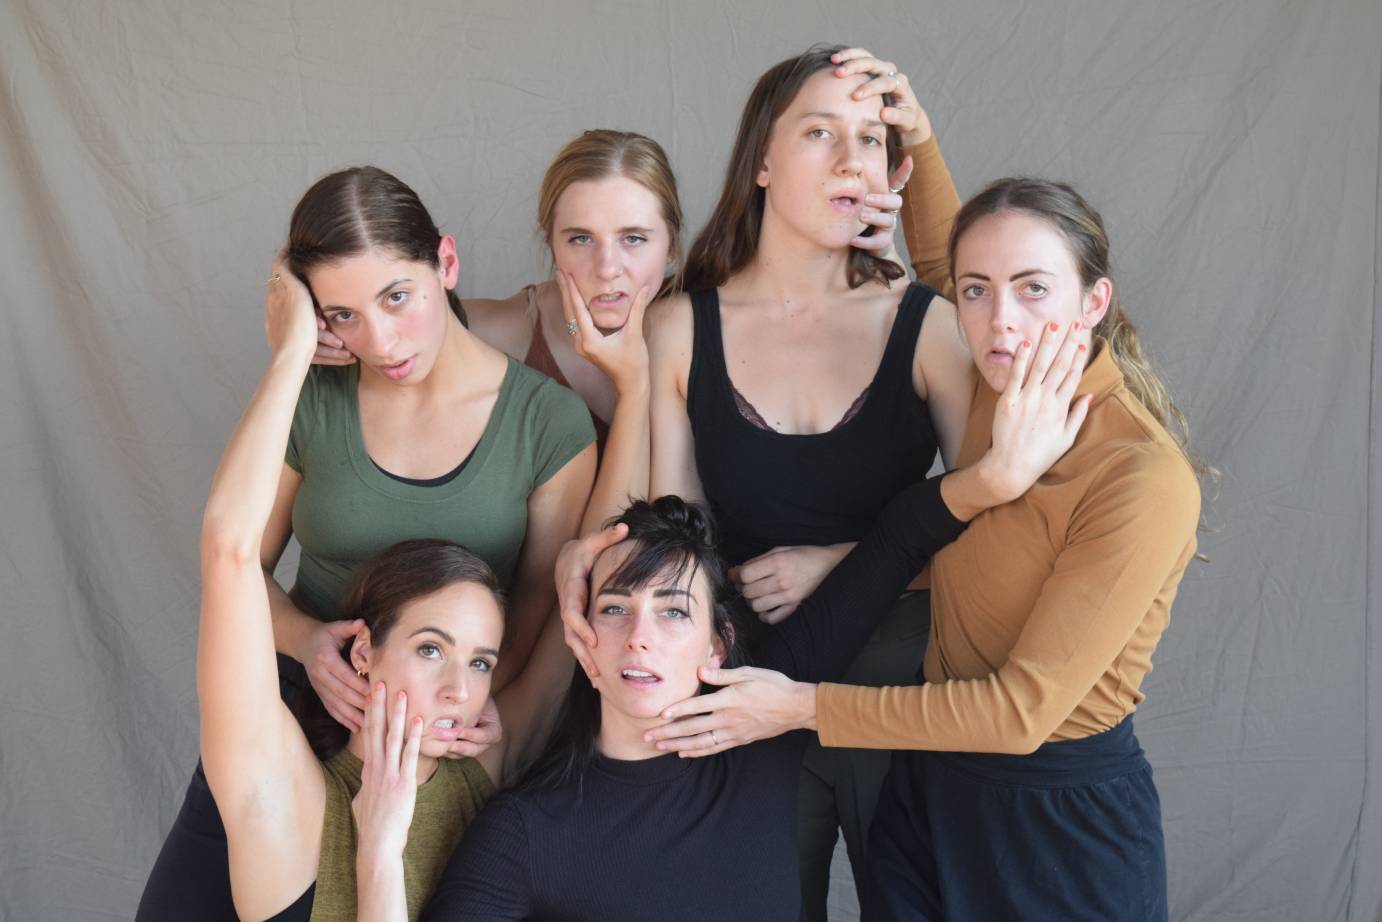 Six women hold onto each other's faces